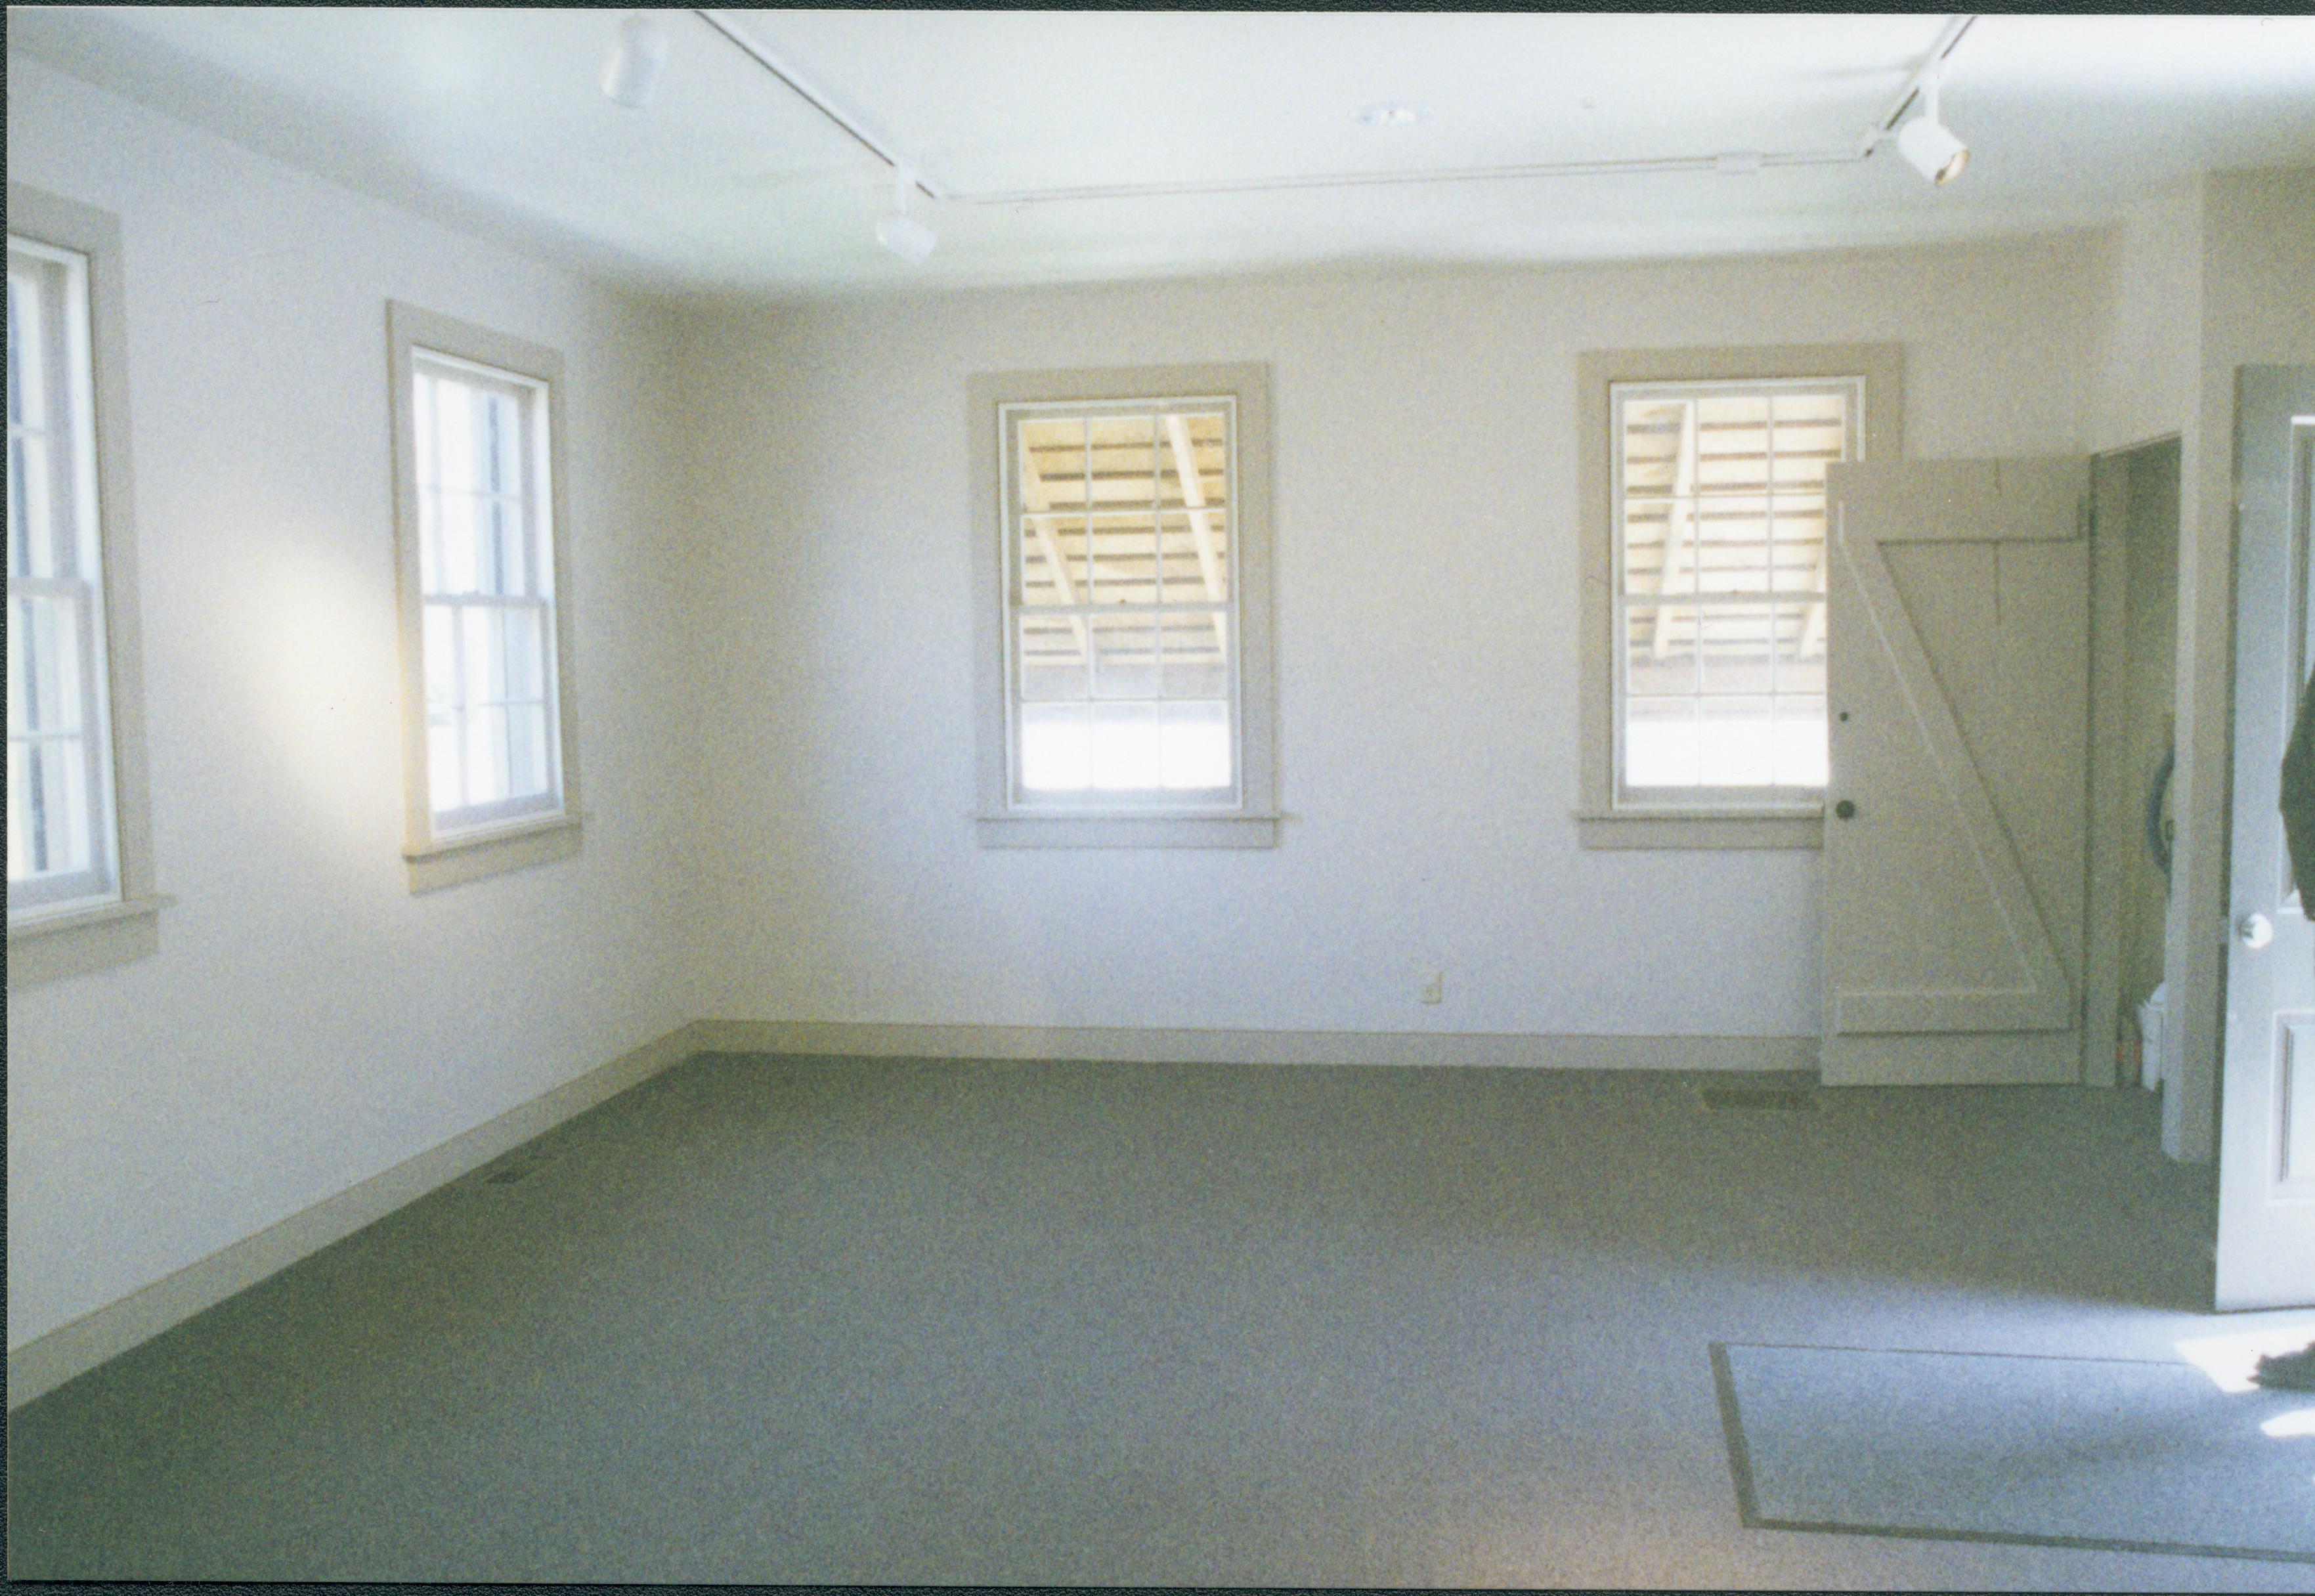 Empty room LIHO NHS- Arnold House Exhibit, Roll 2001-1, exp 18 Arnold House, exhibit